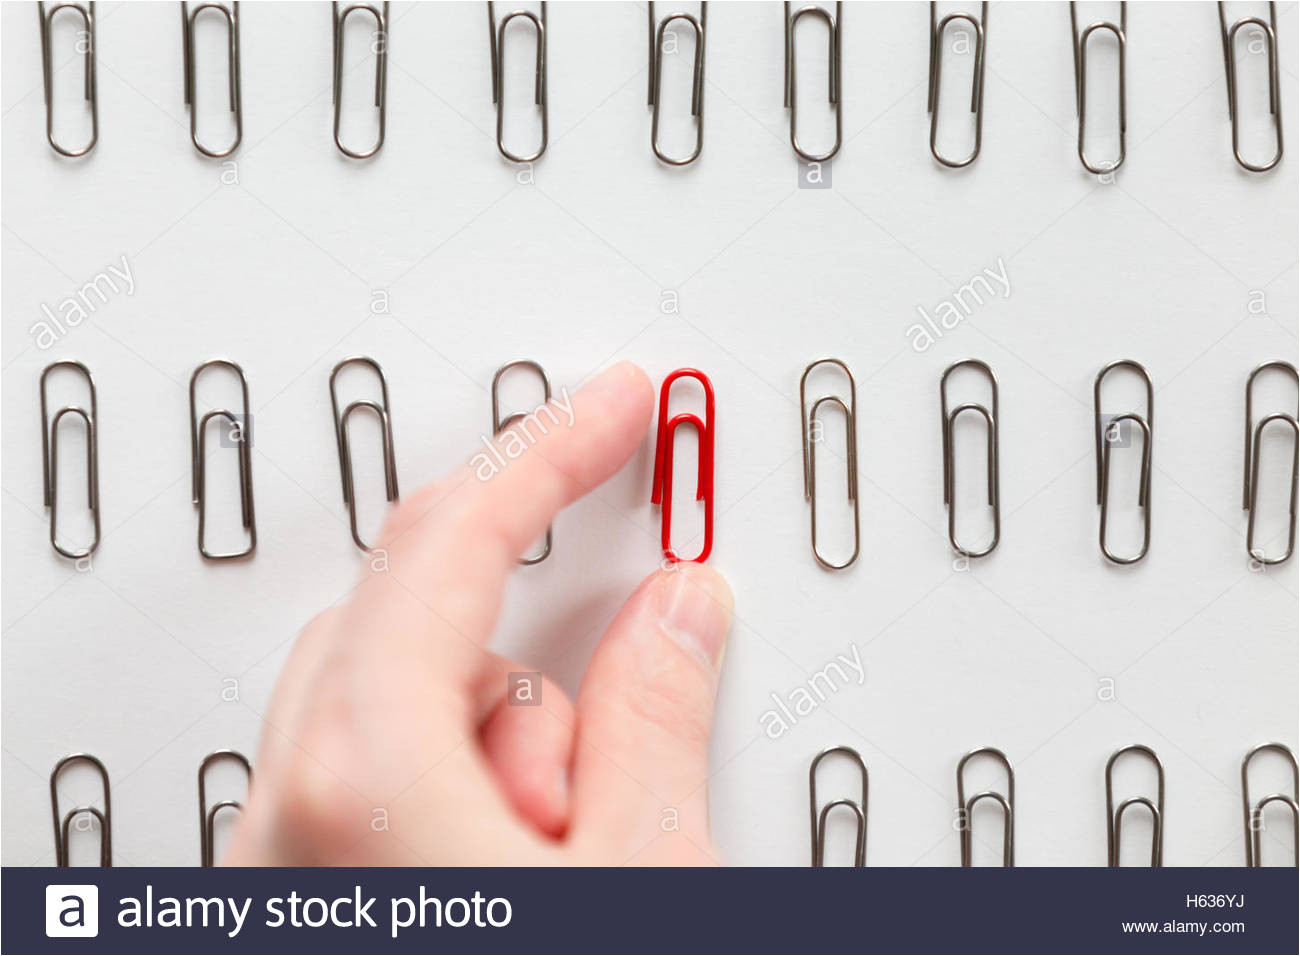 hand picking among metal paperclips one red different from others stock image